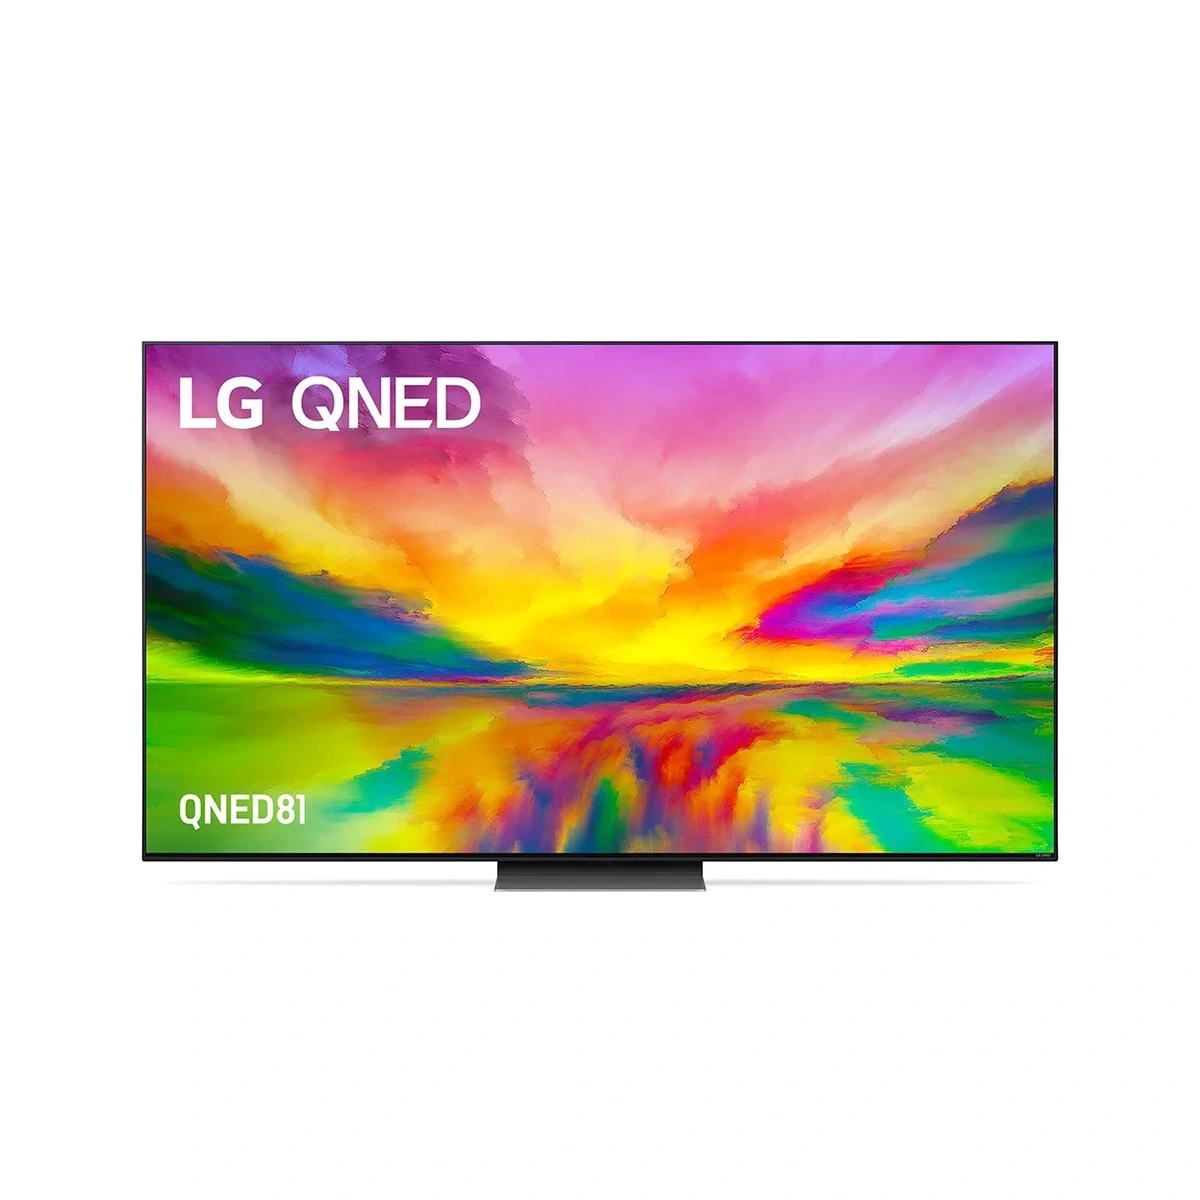 LG QNED81 86-inch 4K Smart QNED TV with Quantum Dot NanoCell, 2023